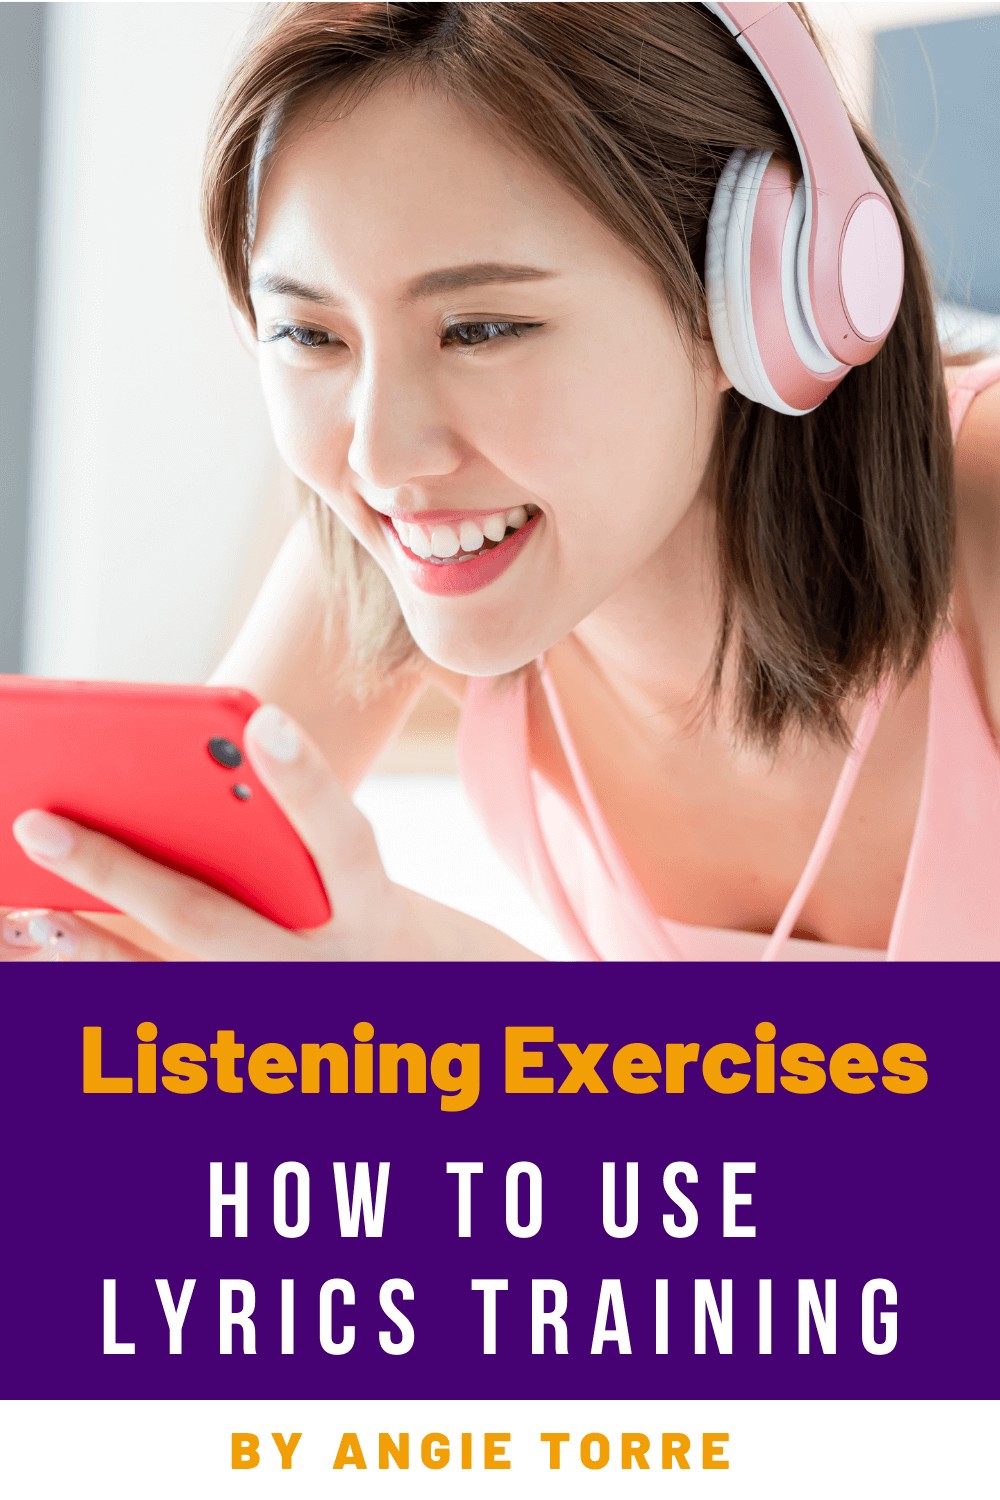 How to Use Lyrics Training for Spanish and French Listening Practice. Woman with earphones on looking at phone and smiling.